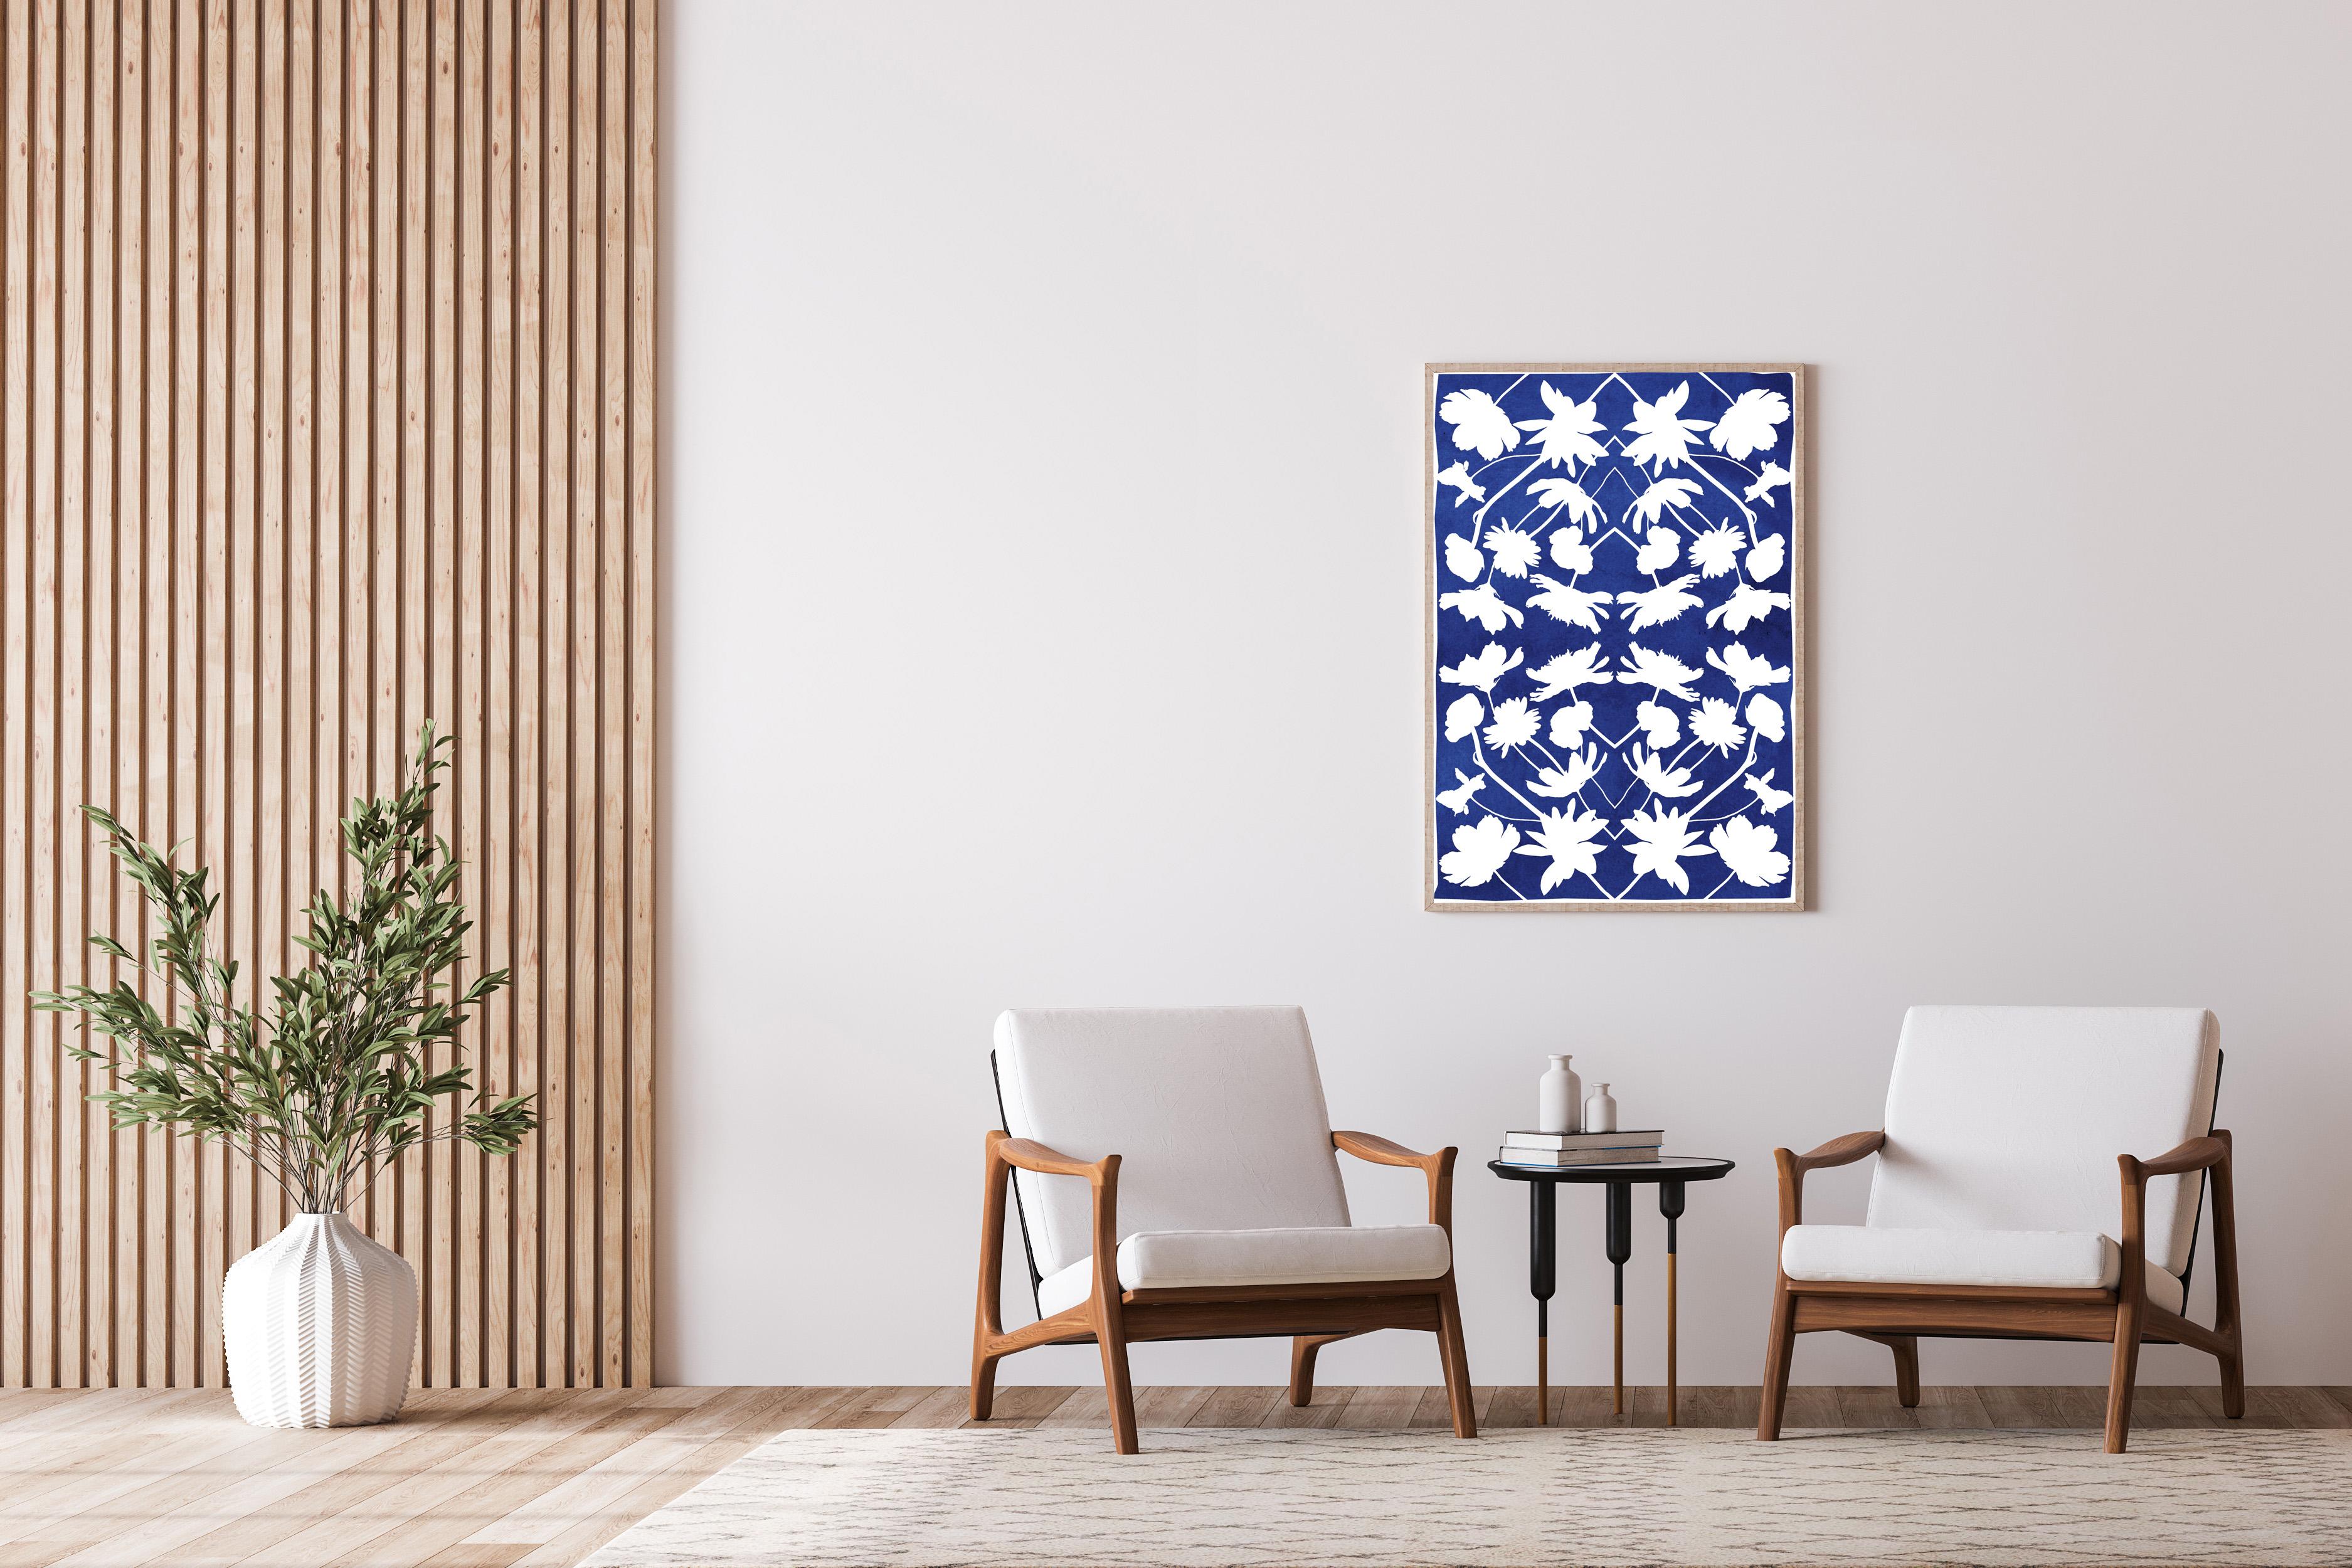 This is an exclusive handprinted limited edition cyanotype.

Details:
+ Title: Flower Kaleidoscope N 2
+ Year: 2022
+ Edition Size: 100
+ Stamped and Certificate of Authenticity provided
+ Measurements : 70x100 cm (28x 40 in.), a standard frame